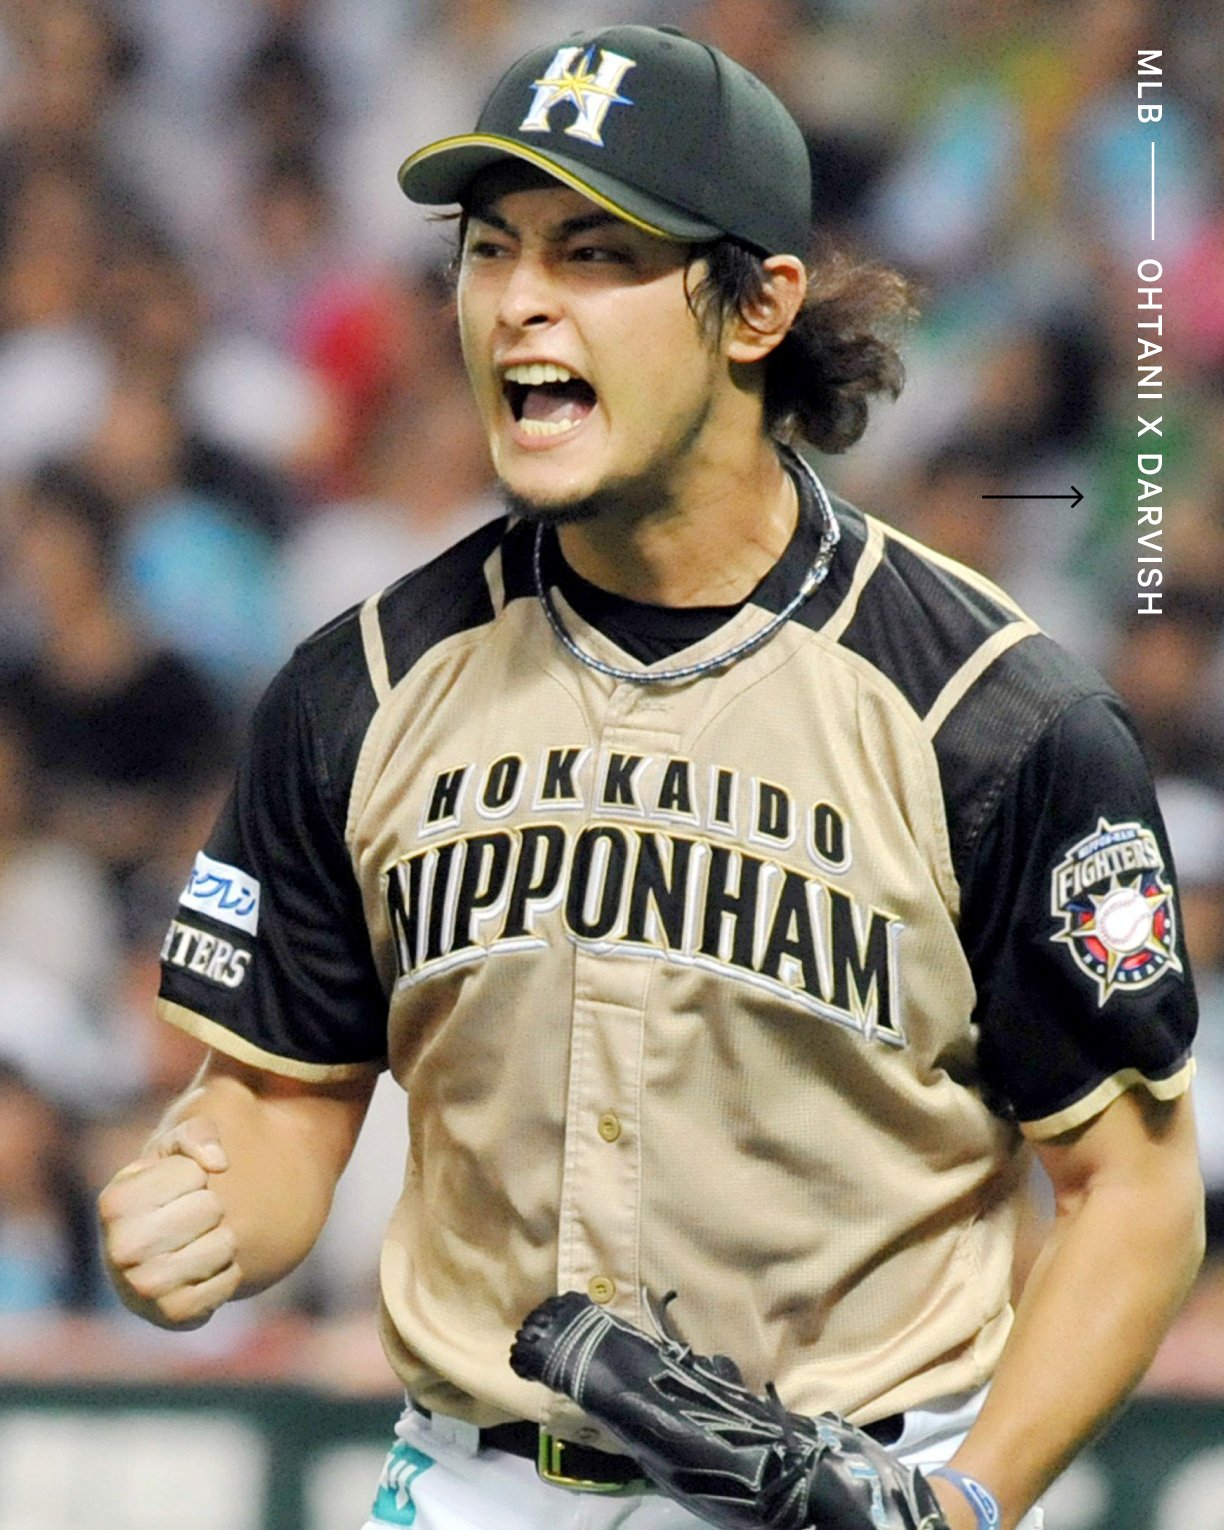 X 上的The Athletic：「Shohei Ohtani and Yu Darvish both played for the Hokkaido  Nippon-Ham Fighters in Japan at different times. In fact, Hokkaido offered  Darvish's No. 11 jersey to Ohtani during recruitment. “